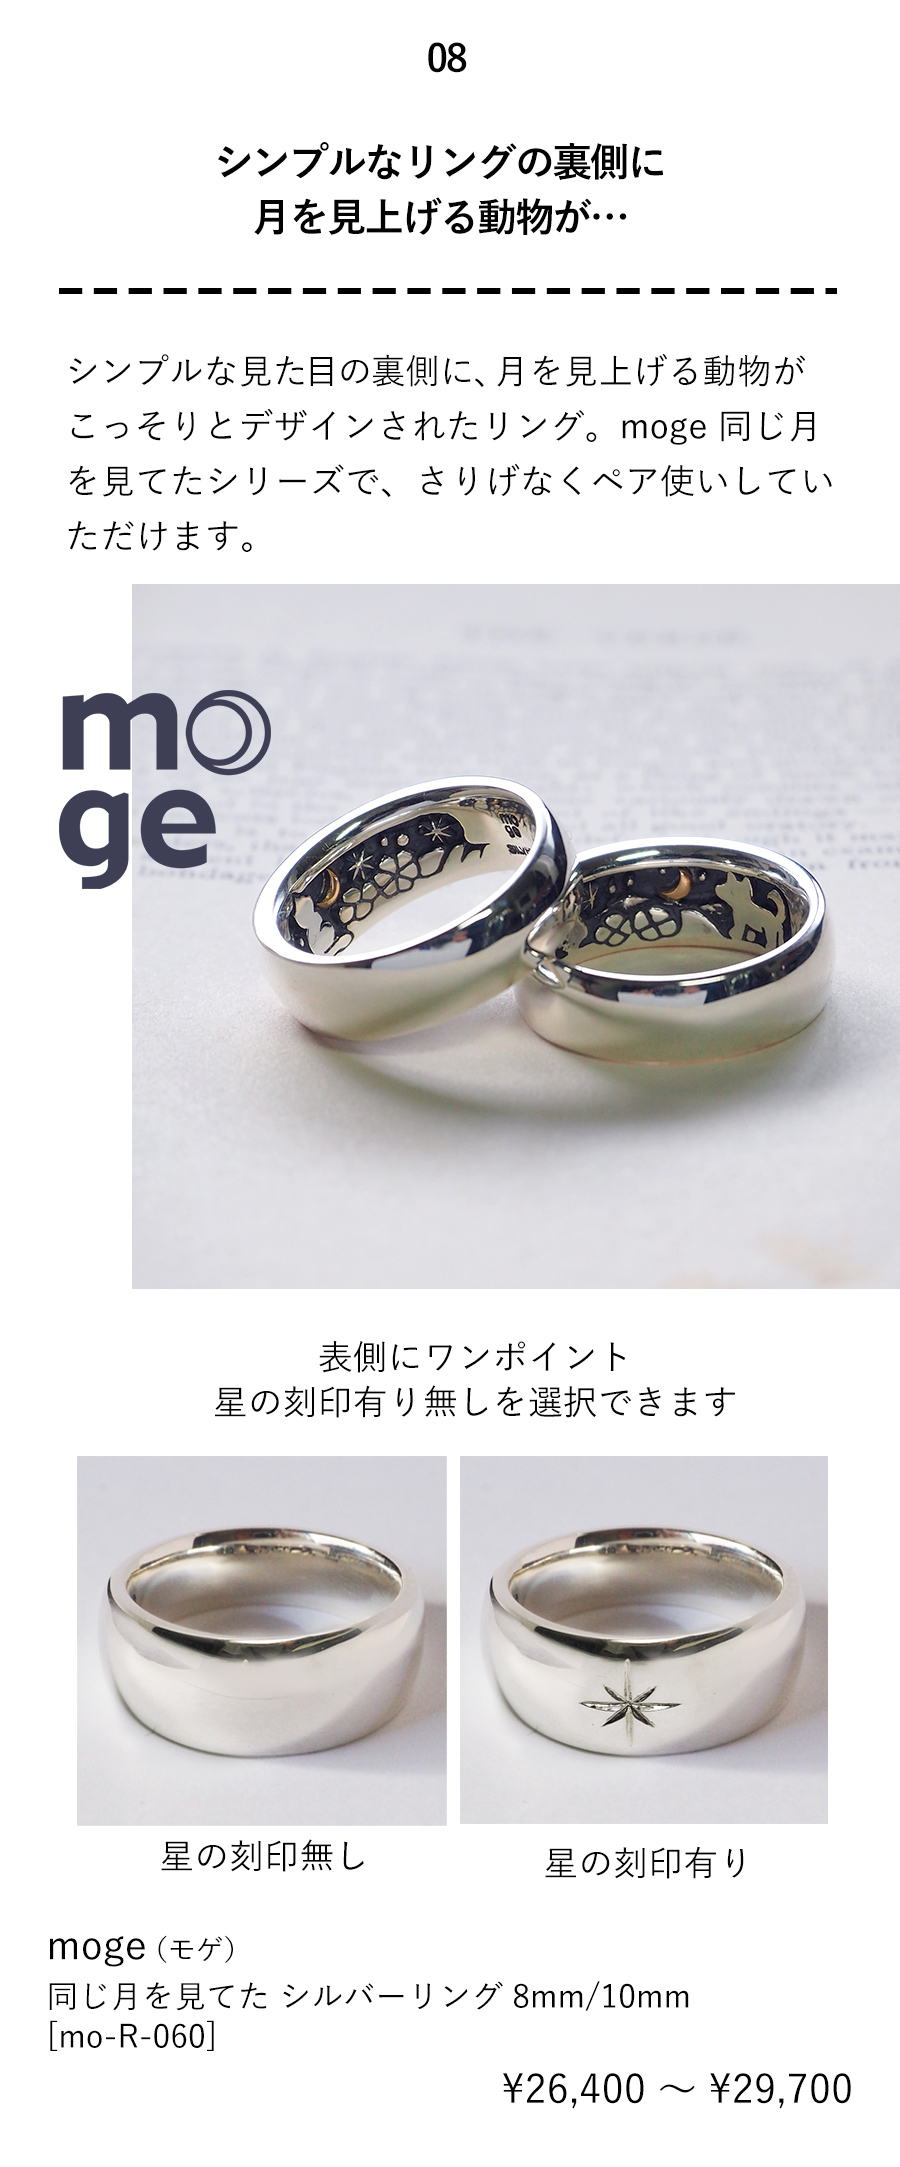 moge Handmade silver accessories<!--nl-->We were looking at the same moon